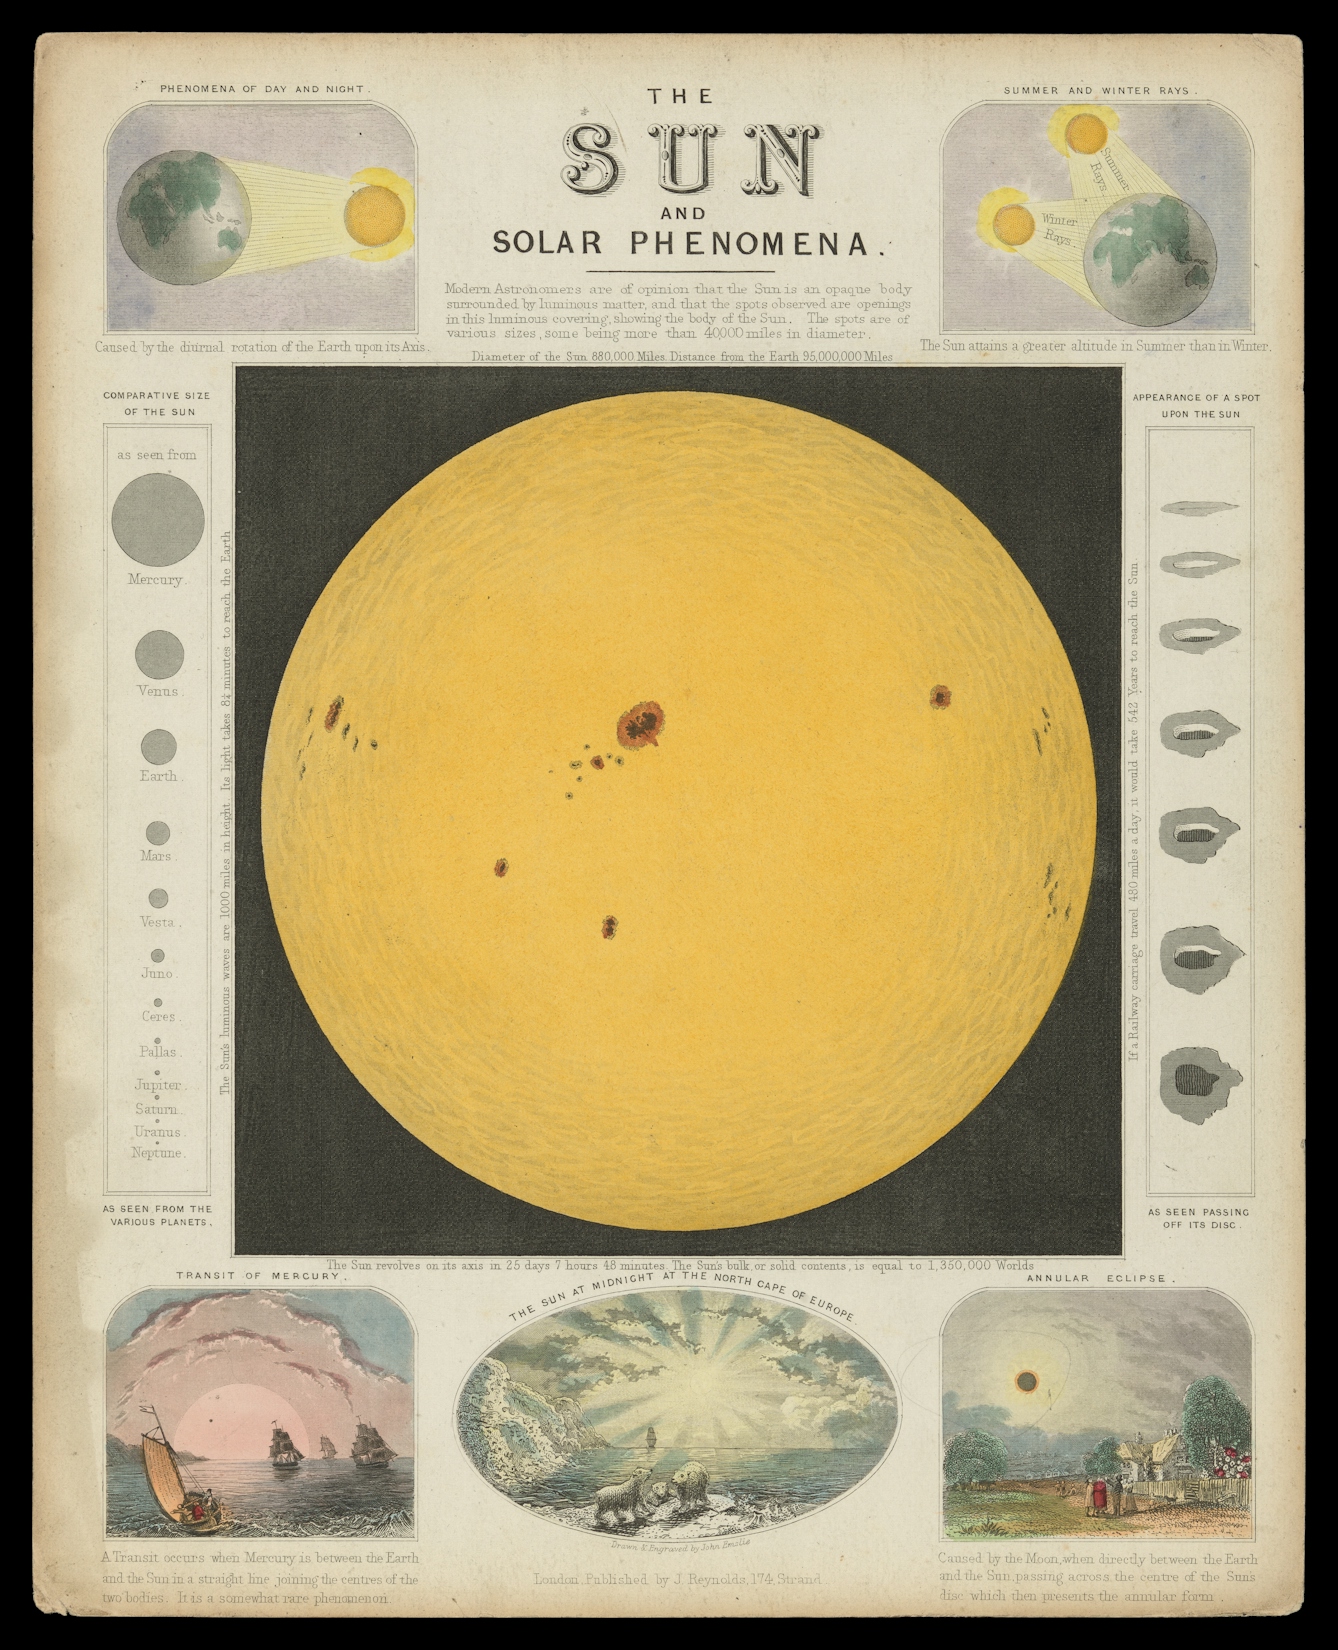 Image of 19th Century astronomy poster titled The Sun and Solar Phenomena